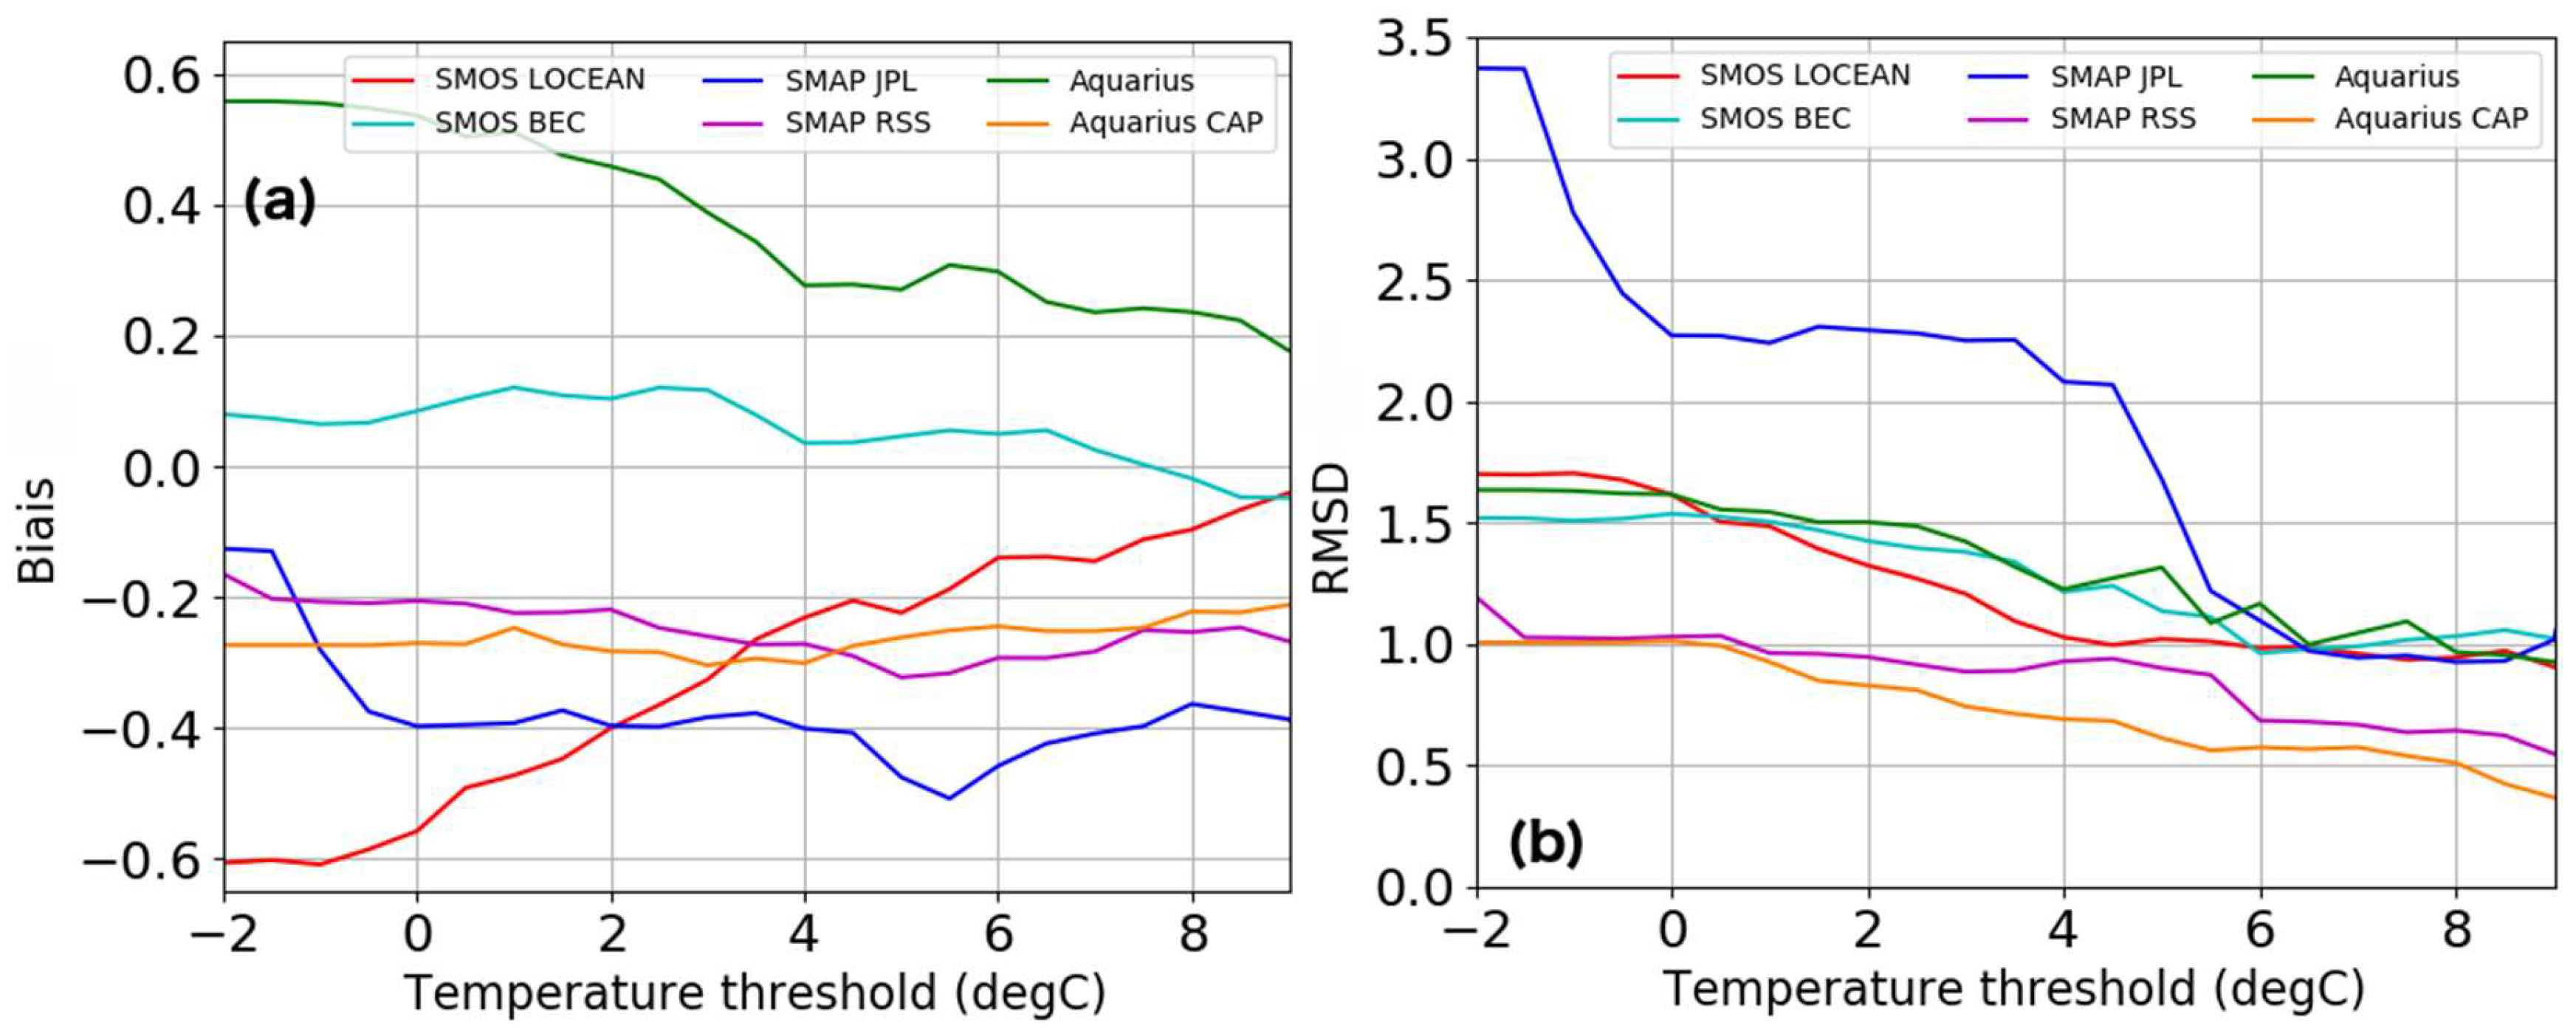 Remote Sensing | Free Full-Text | Evaluation and Intercomparison of SMOS,  Aquarius, and SMAP Sea Surface Salinity Products in the Arctic Ocean